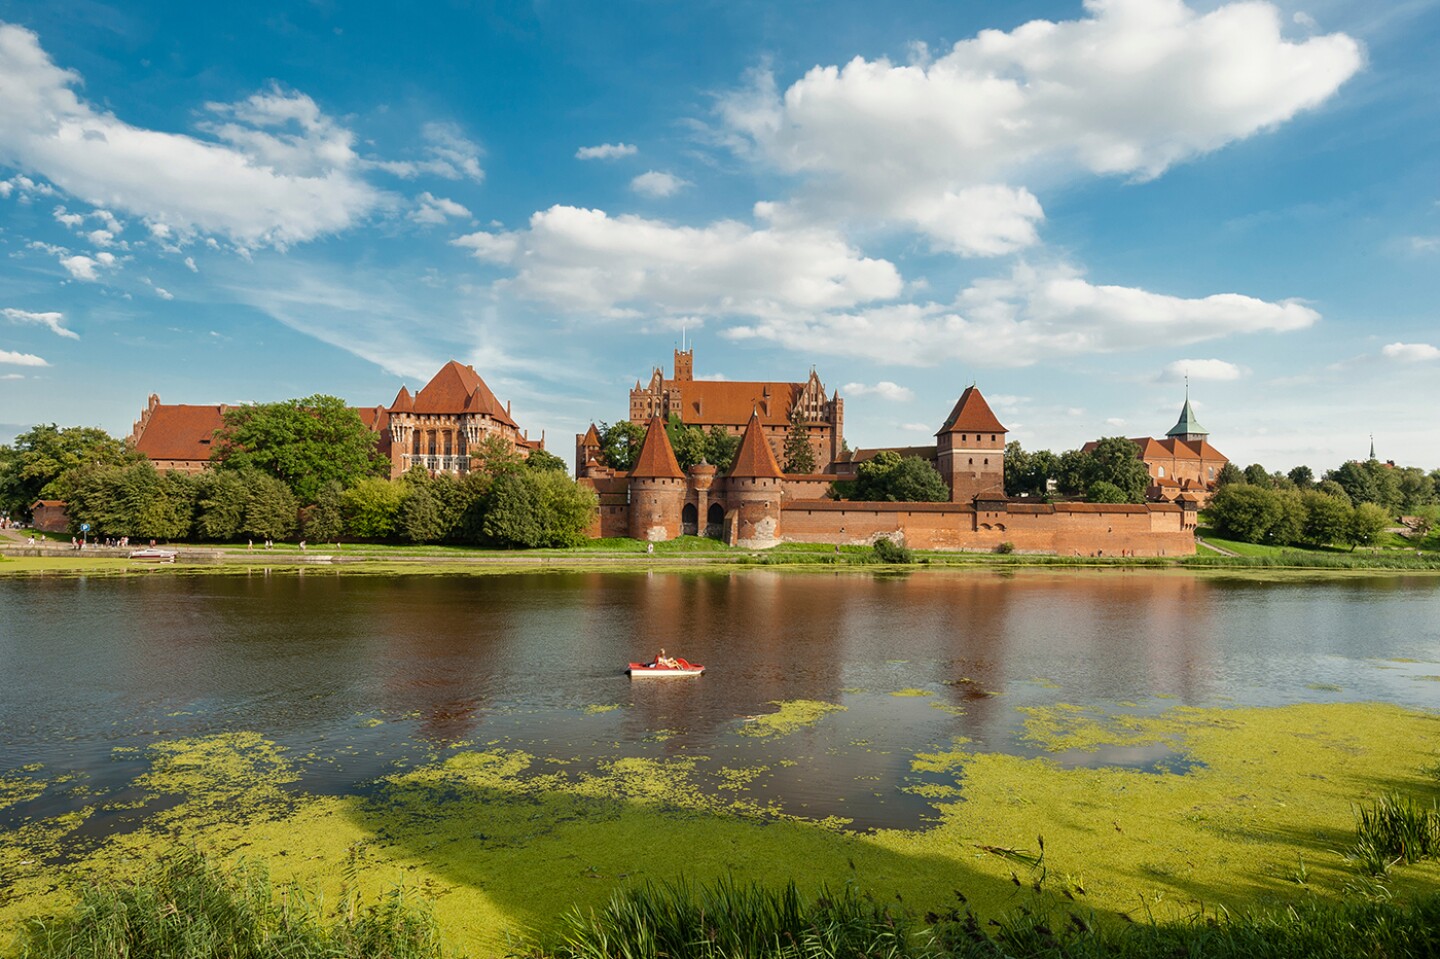 <h2>12. Malbork Castle</h2> <p><i>Malbork, Poland</i></p> <p> Also known by a much longer name—<a class="Link" href="https://www.afar.com/places/malbork-castle-malbork" rel="noopener">The Castle of the Teutonic Order in Malbork</a>—this is the largest brick fortress complex in the world, sprawling across 52 acres along the banks of the Nogat River in northern <a class="Link" href="https://www.afar.com/travel-guides/poland/guide" rel="noopener">Poland</a>. (Catch the highlights with an audio guide or, in the summer months, English-language guided tours.) Construction began in 1309, with a high castle and chapel fortified by moats and several defensive walls. In the 14th century, a low castle was added, along with several outbuildings. </p> <p>The entire complex was virtually destroyed during heavy fighting in World War II; painstakingly rebuilt to its former glory, it’s now a museum and UNESCO World Heritage site. The castle’s collections of amber, original 14th- and 15th-century furnishings, and medieval tombstones are nearly as splendid as its architectural details: towering arched ceilings, colorful frescoes, intricate tile work, and stained glass.<br> </p> <h3>How to visit Malbork Castle</h3> <p><a class="Link" href="https://zamek.malbork.pl/en/home/" rel="noopener">Malbork</a> is a 30-minute train ride from Gdansk or around 2.5 hours from Warsaw; from the station, it’s about a 15-minute walk (or quicker taxi ride) to the castle.</p>